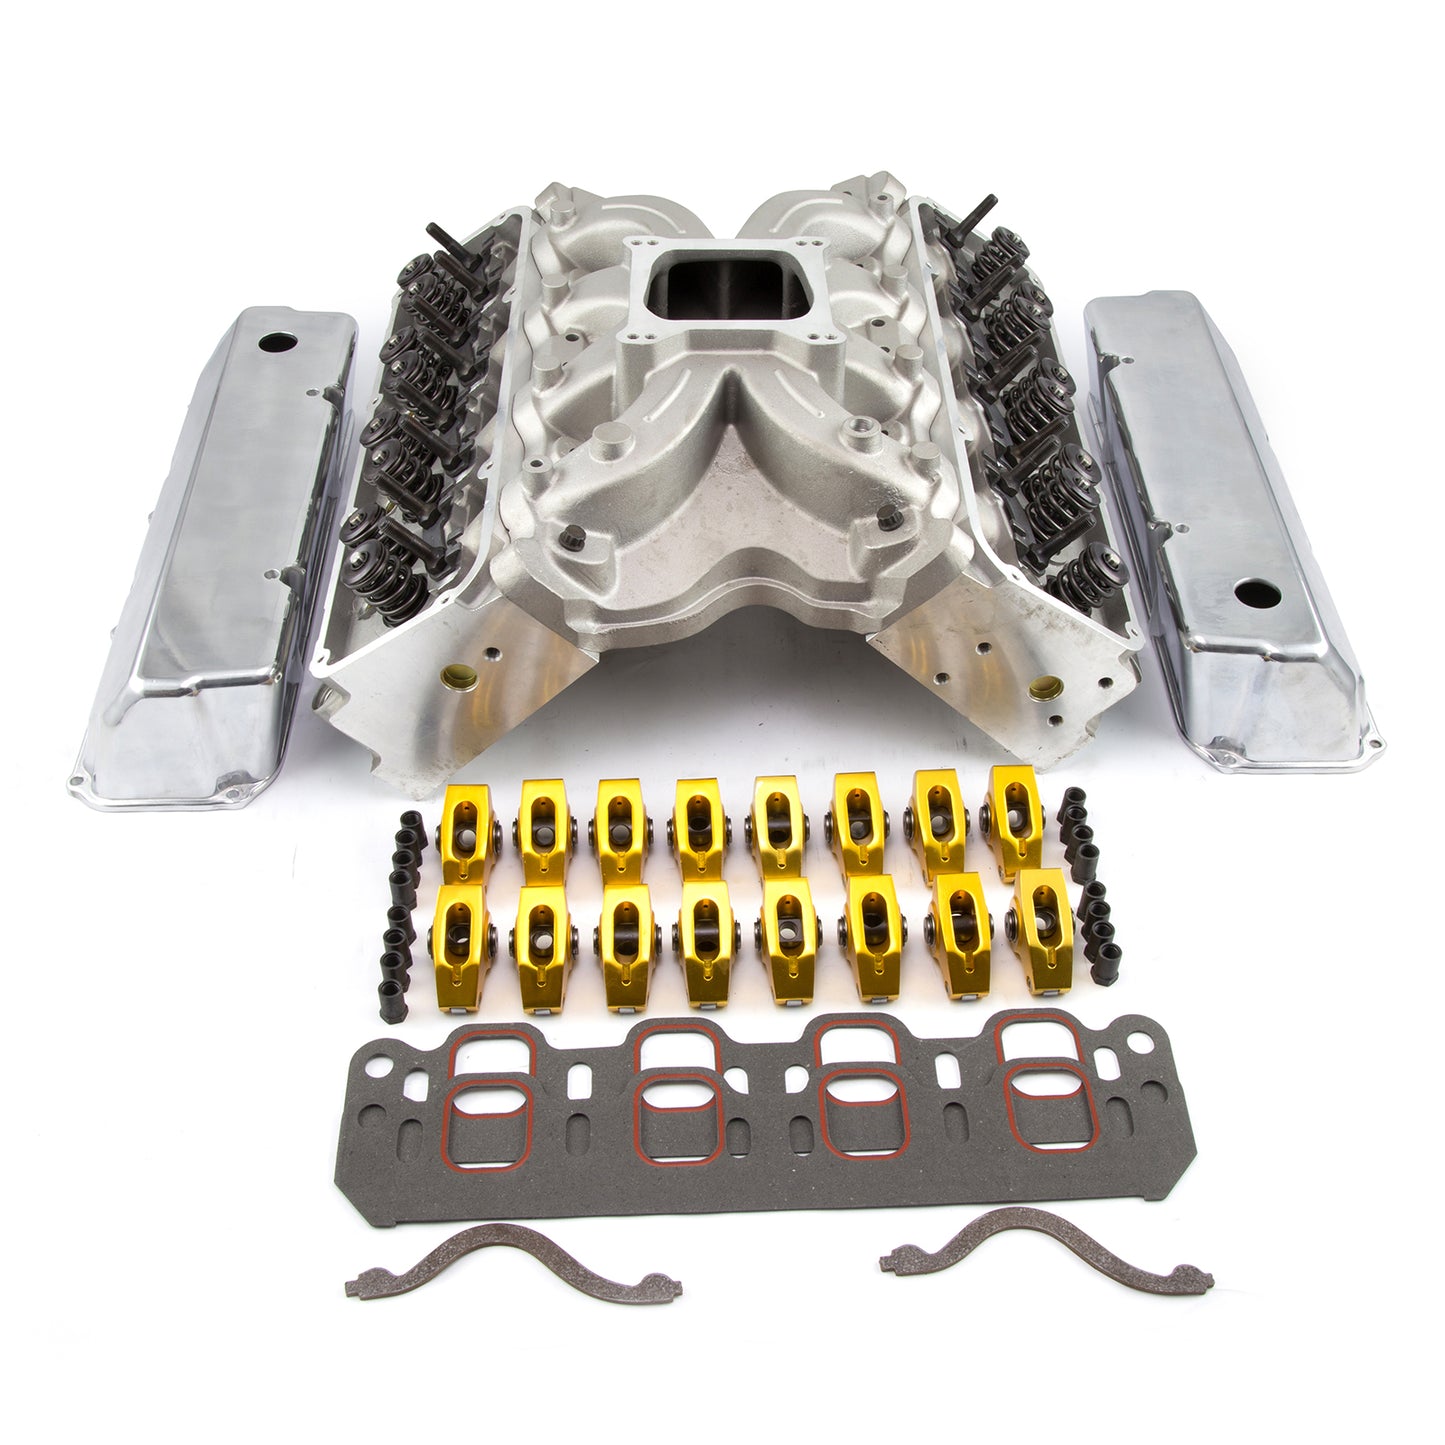 Speedmaster PCE435.1042 Fits Ford 302 351C Cleveland Hyd Roller Cylinder Head Top End Engine Combo Kit